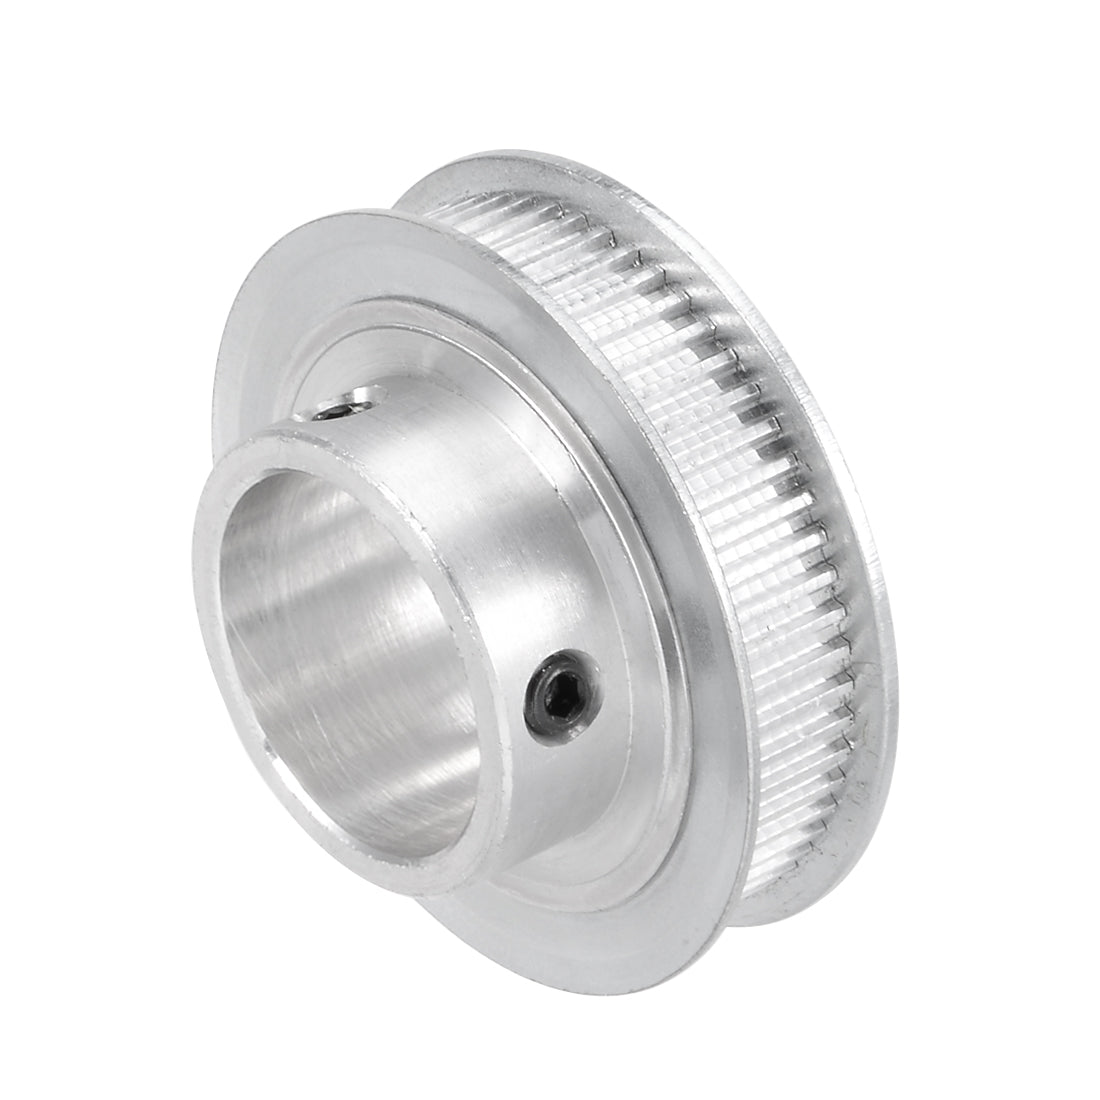 uxcell Uxcell Aluminum Timing Pulley M-X-L 60 Teeth 17mm Bore Timing Belt Pulley Synchronous Wheel for 6mm Belt